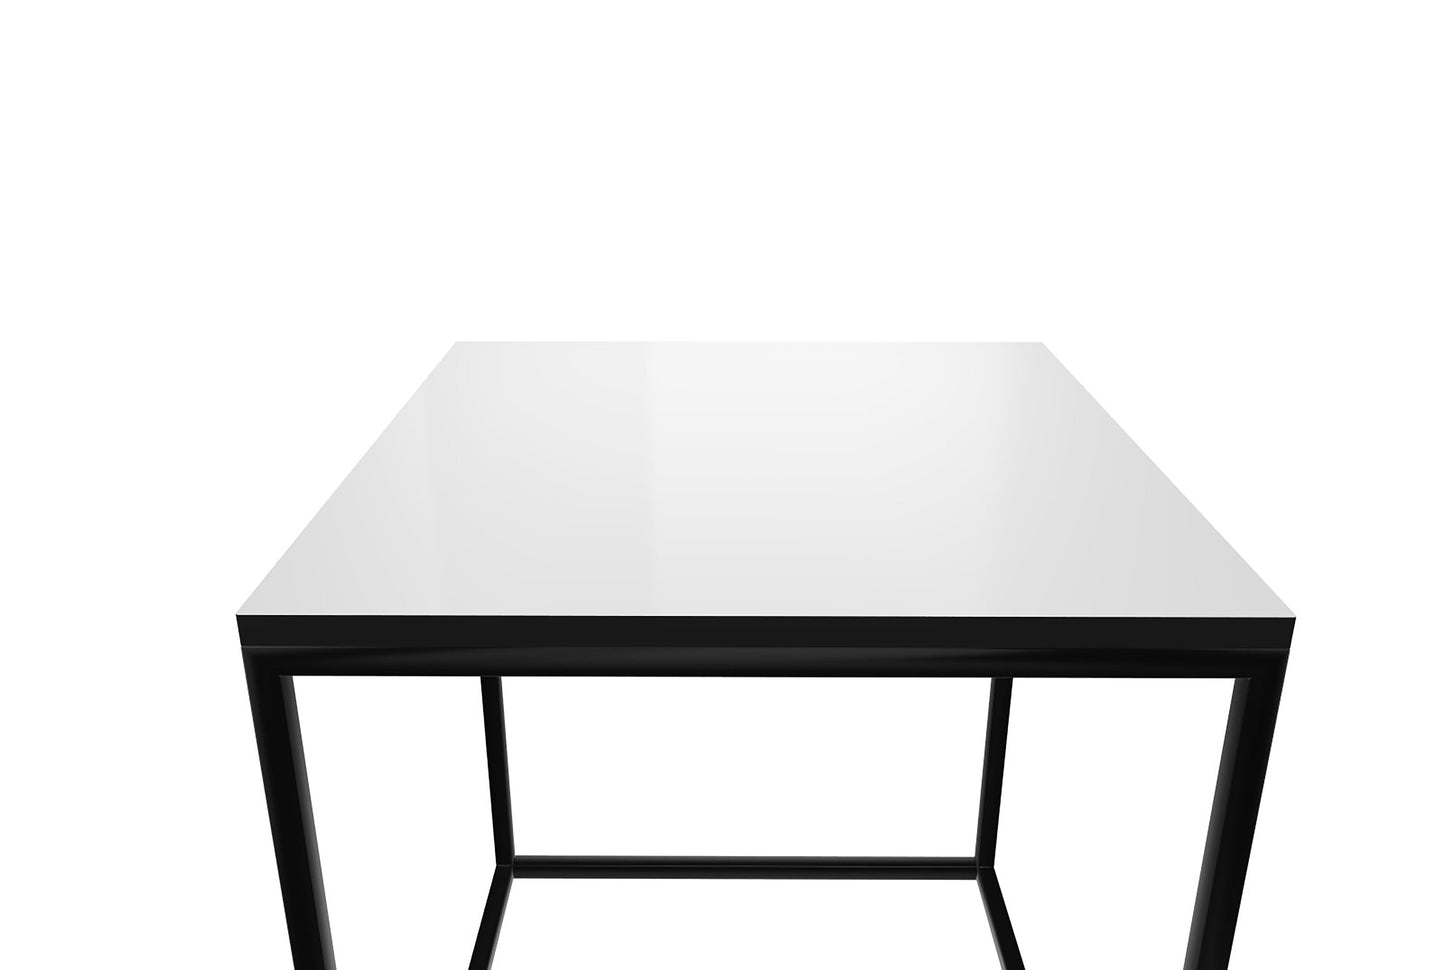 HomeRoots 18" Acrylic Contempo Square Coffee Table With Black and White Finish